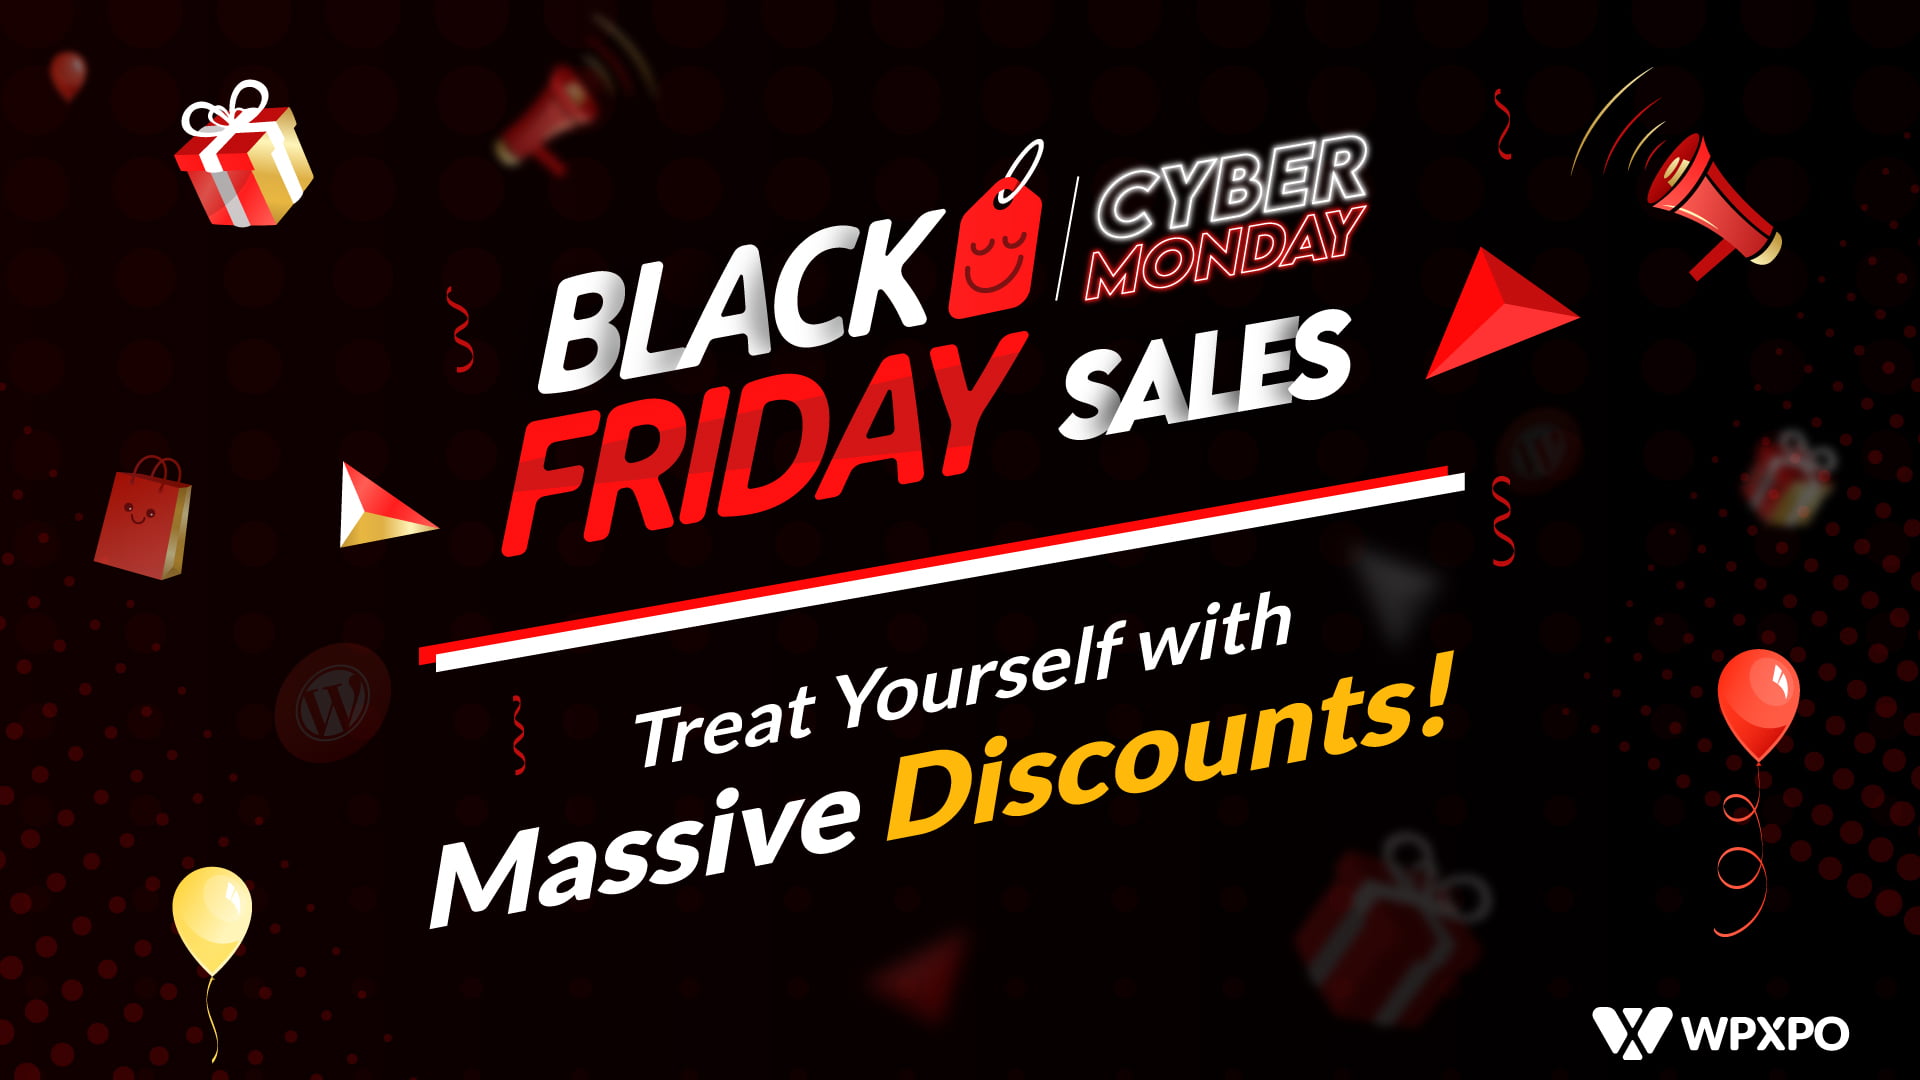 WordPress Discounts: Black Friday and Cyber Monday Deals[2021]